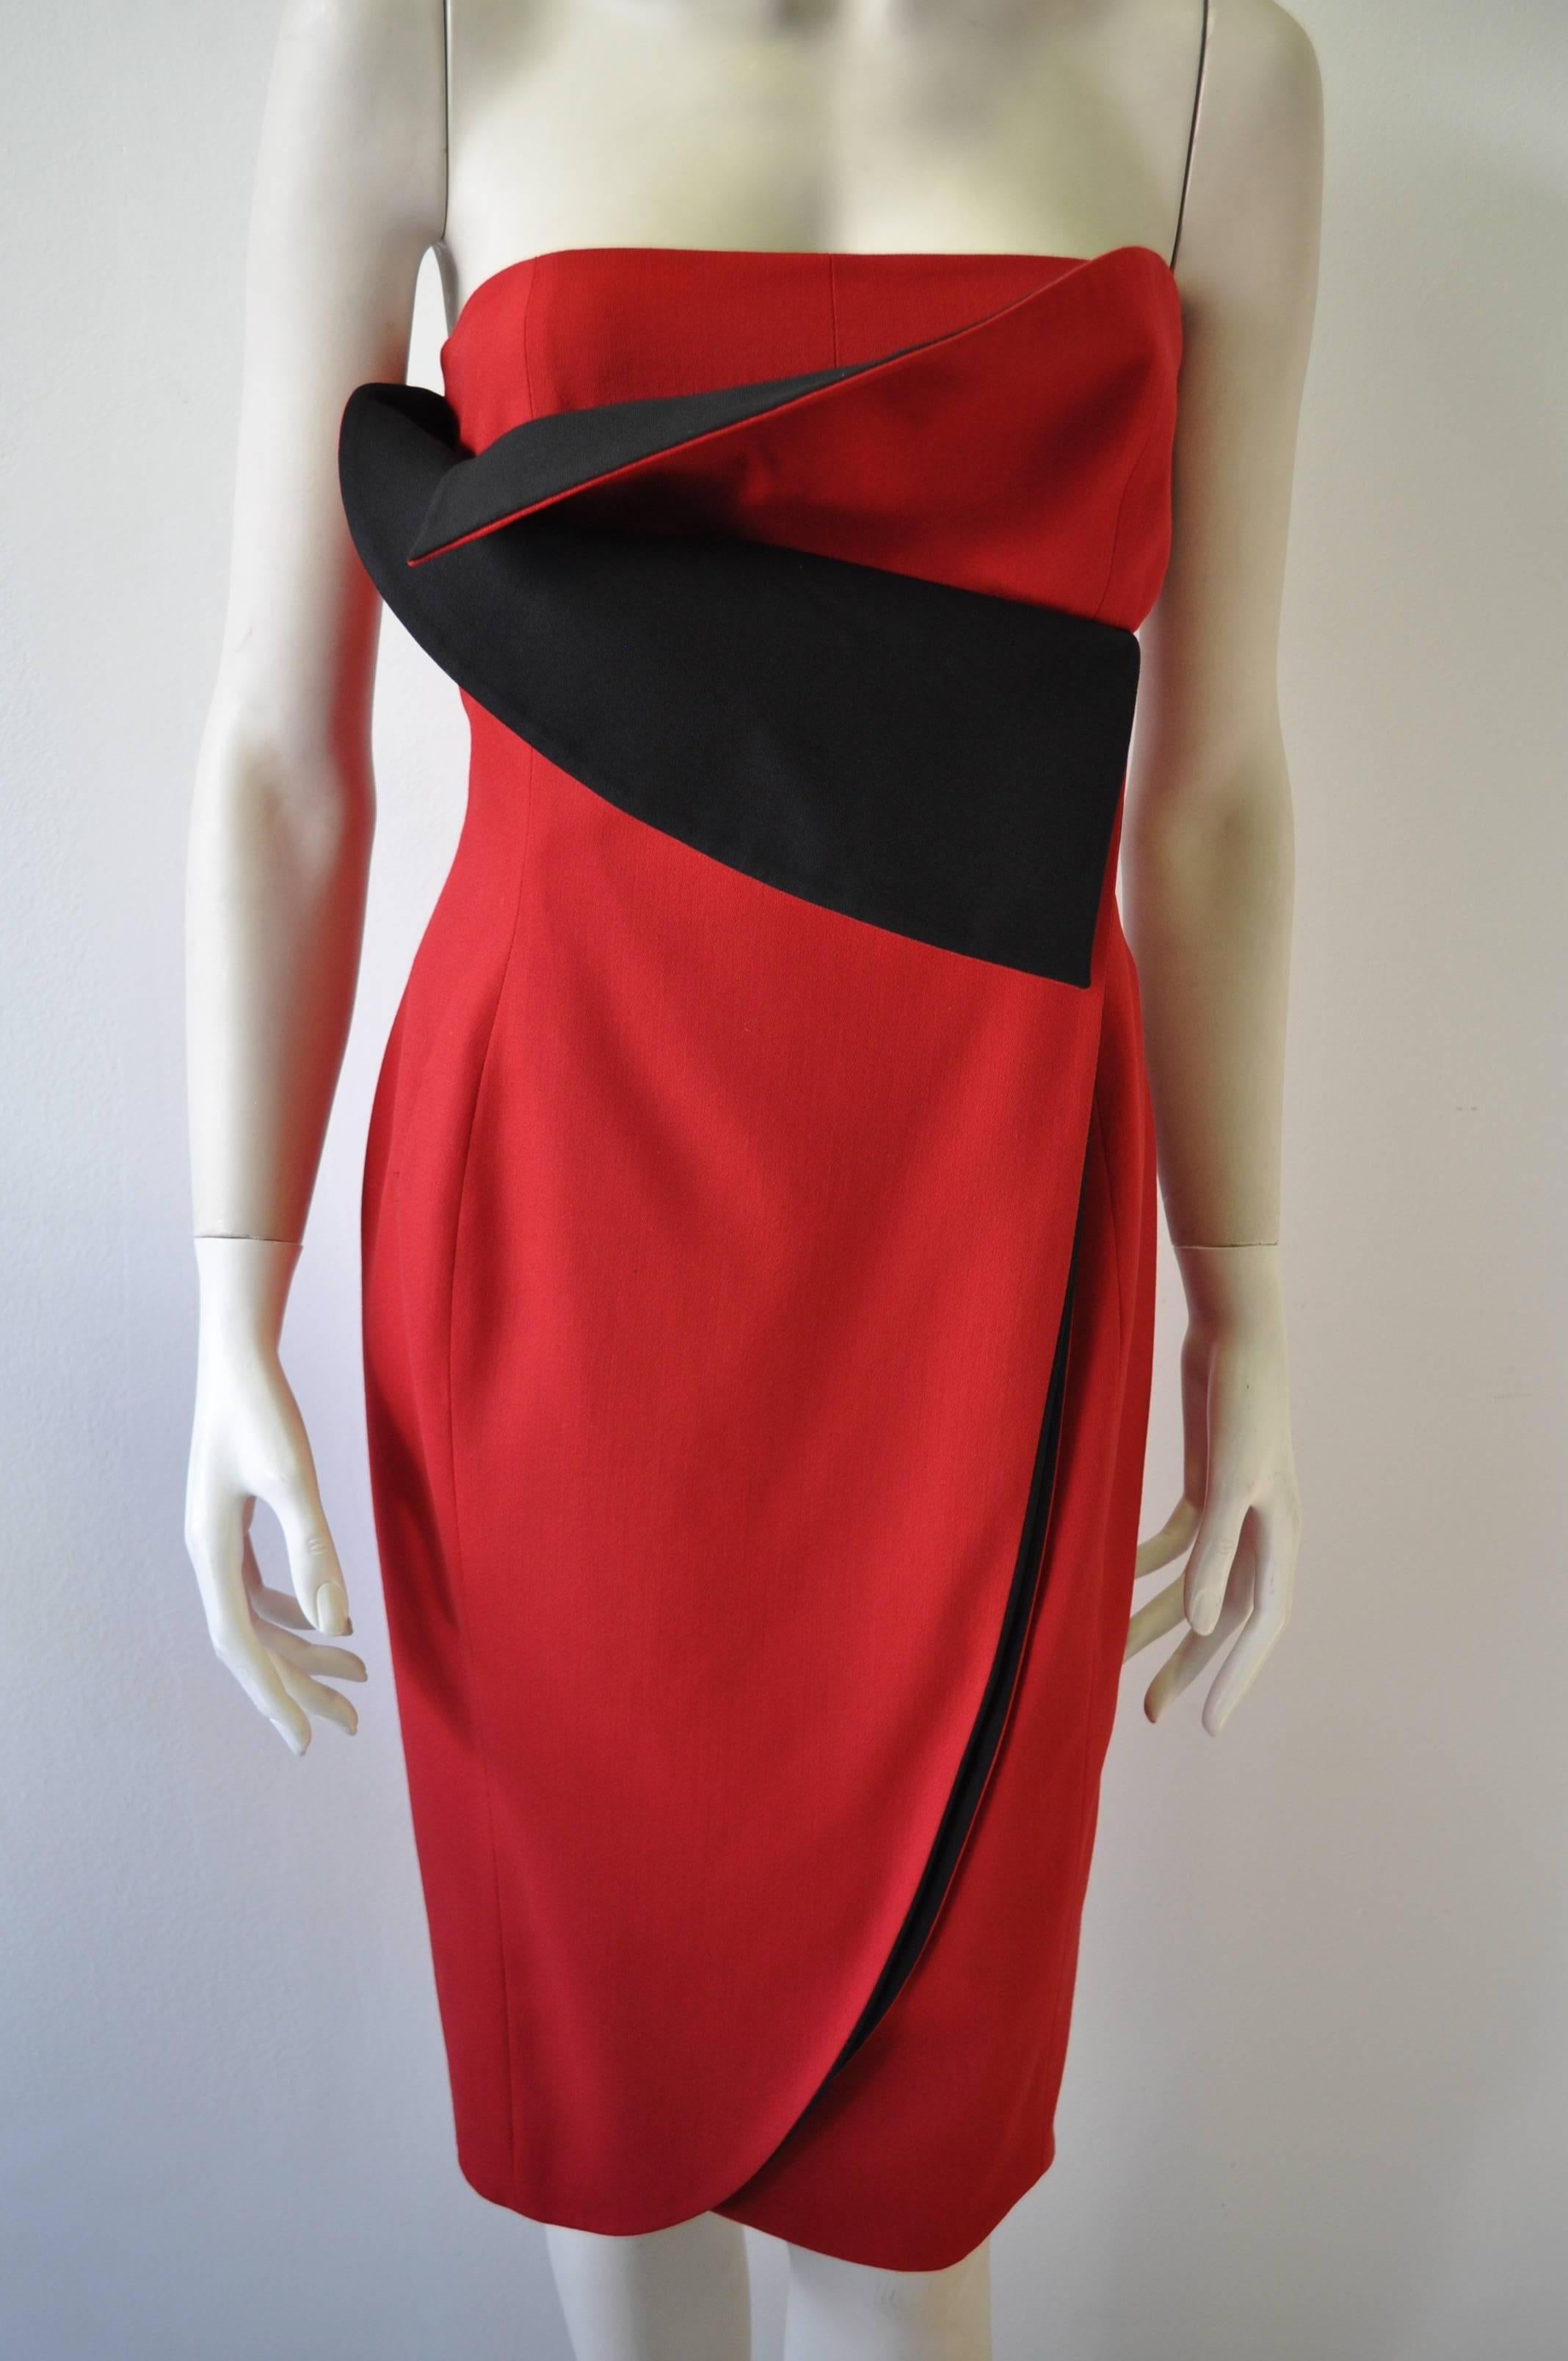 Exceptional Gianfranco Ferre Rose Petal Architectural Design Cocktail Dress.  85% Wool, 15% Nylon